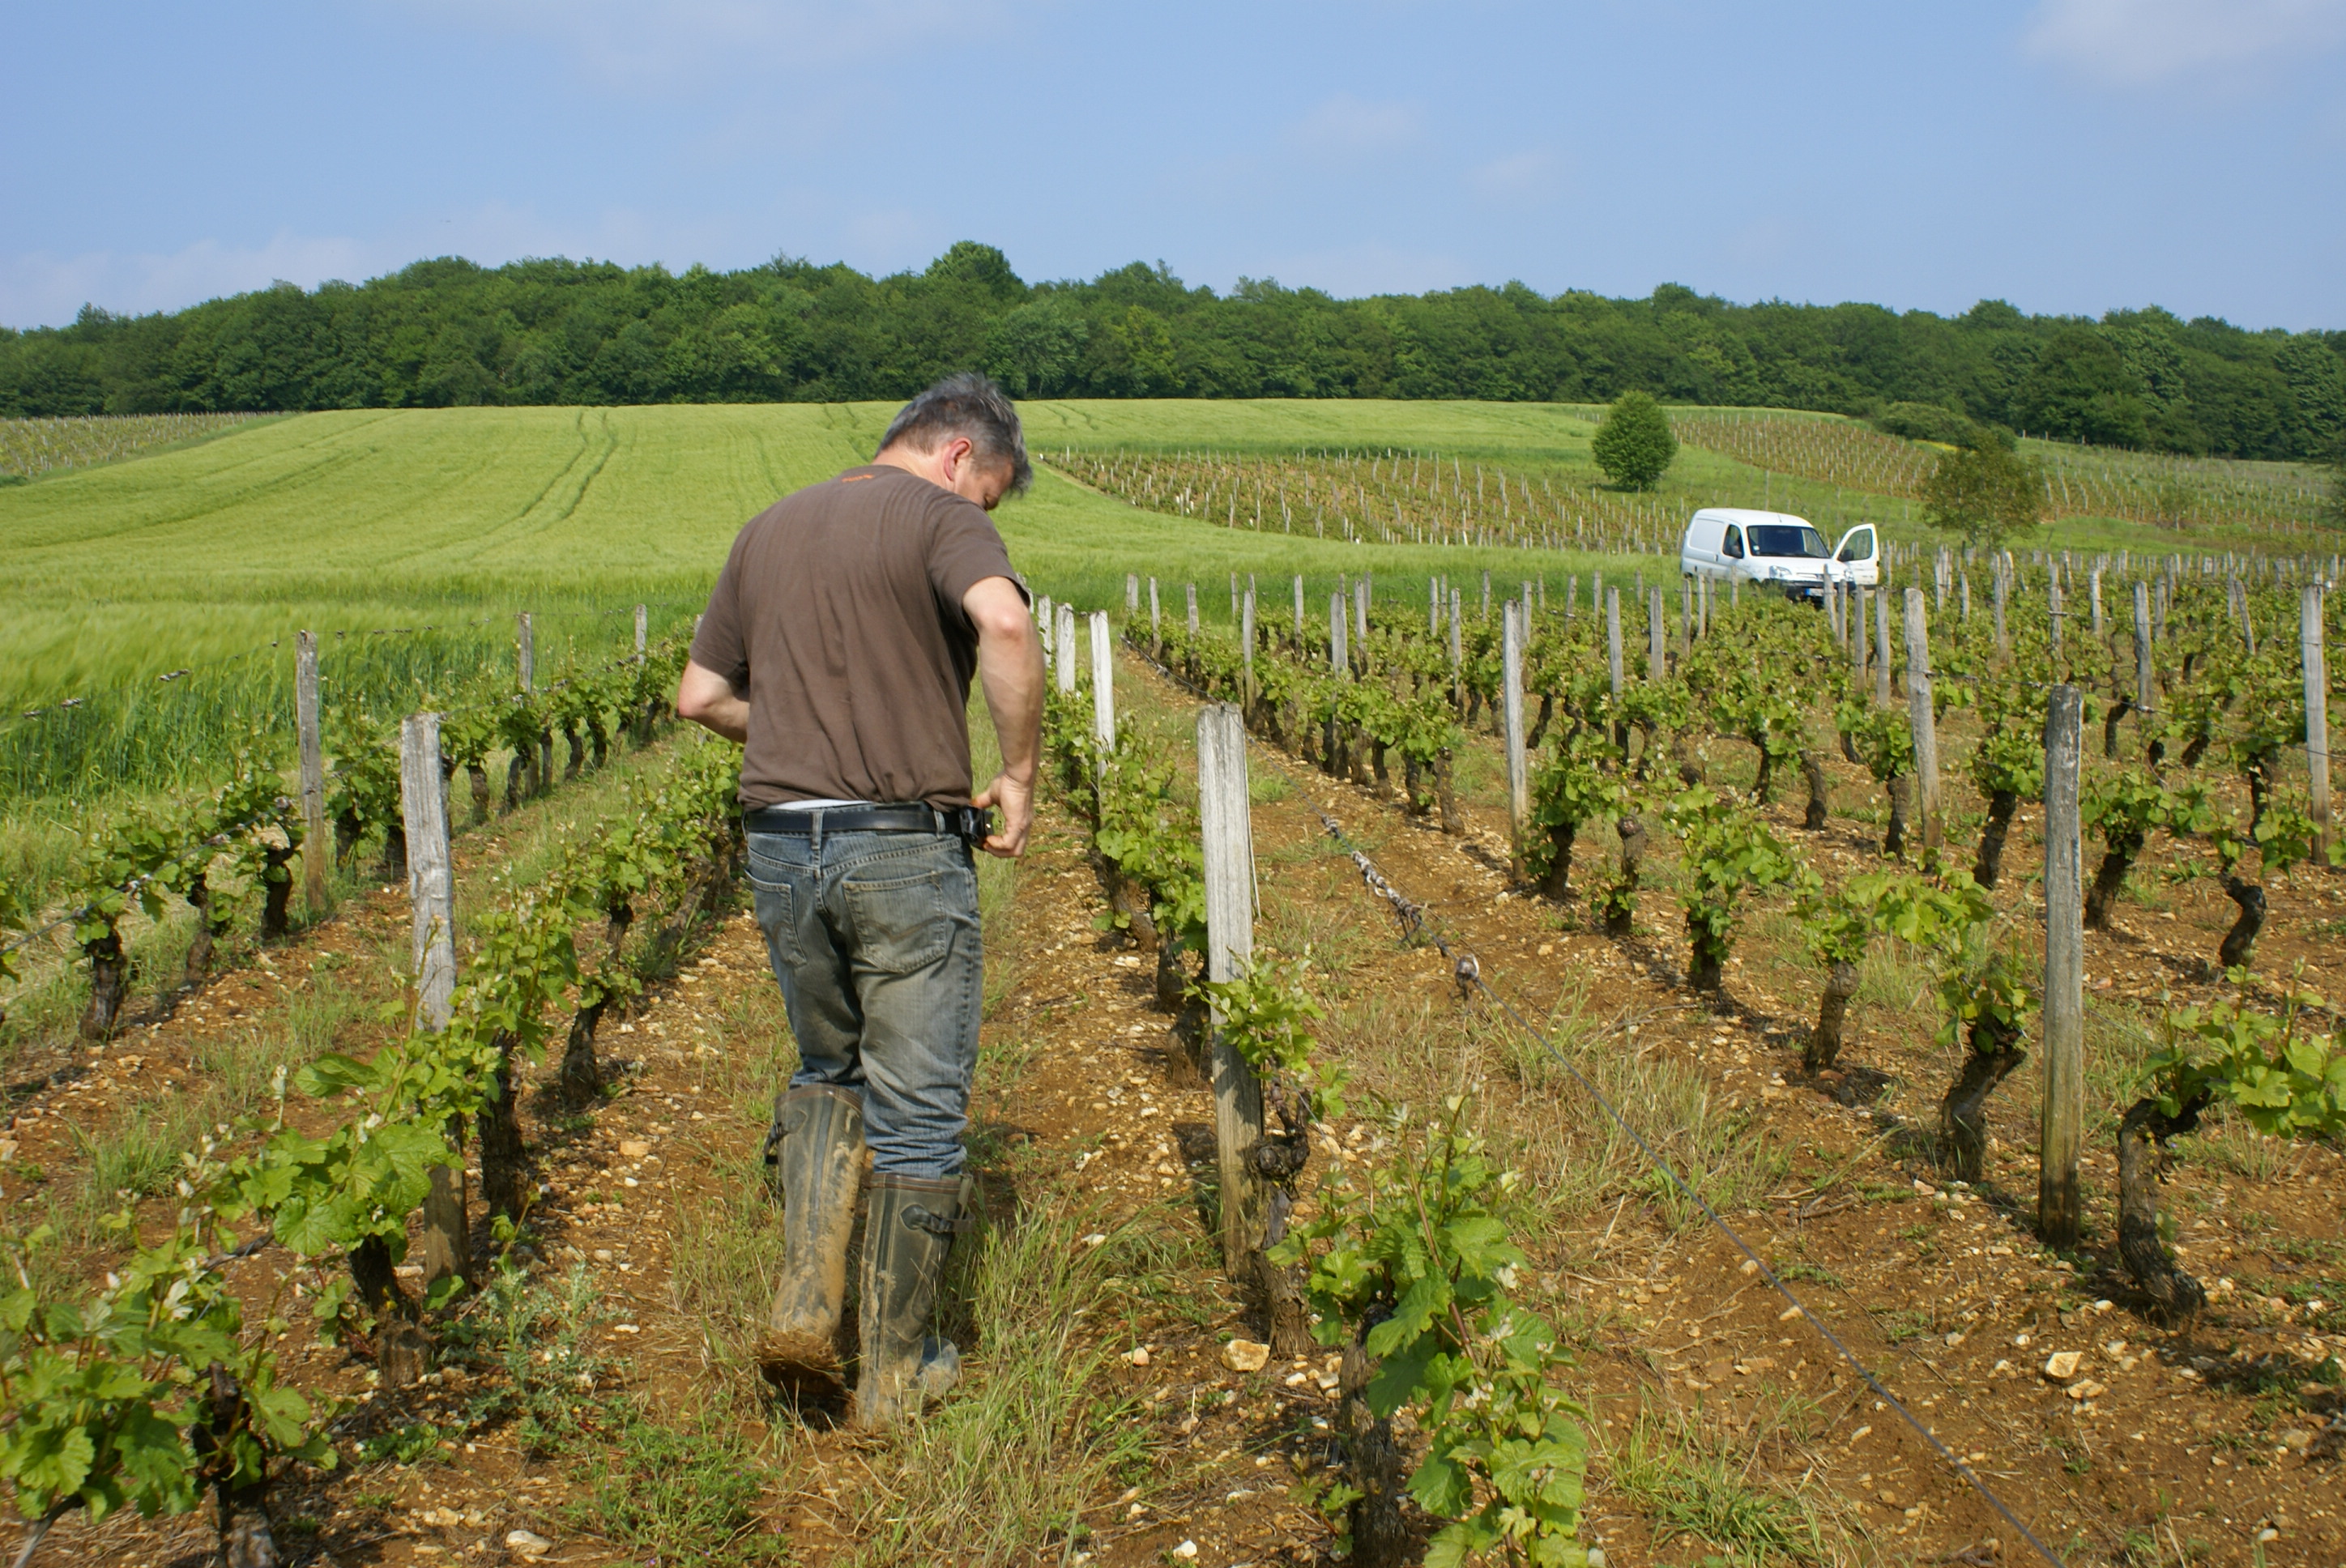 The guided classical wine tours are offered to <strong>epicureans</strong> wishing to discover Upper-Loire appellations.